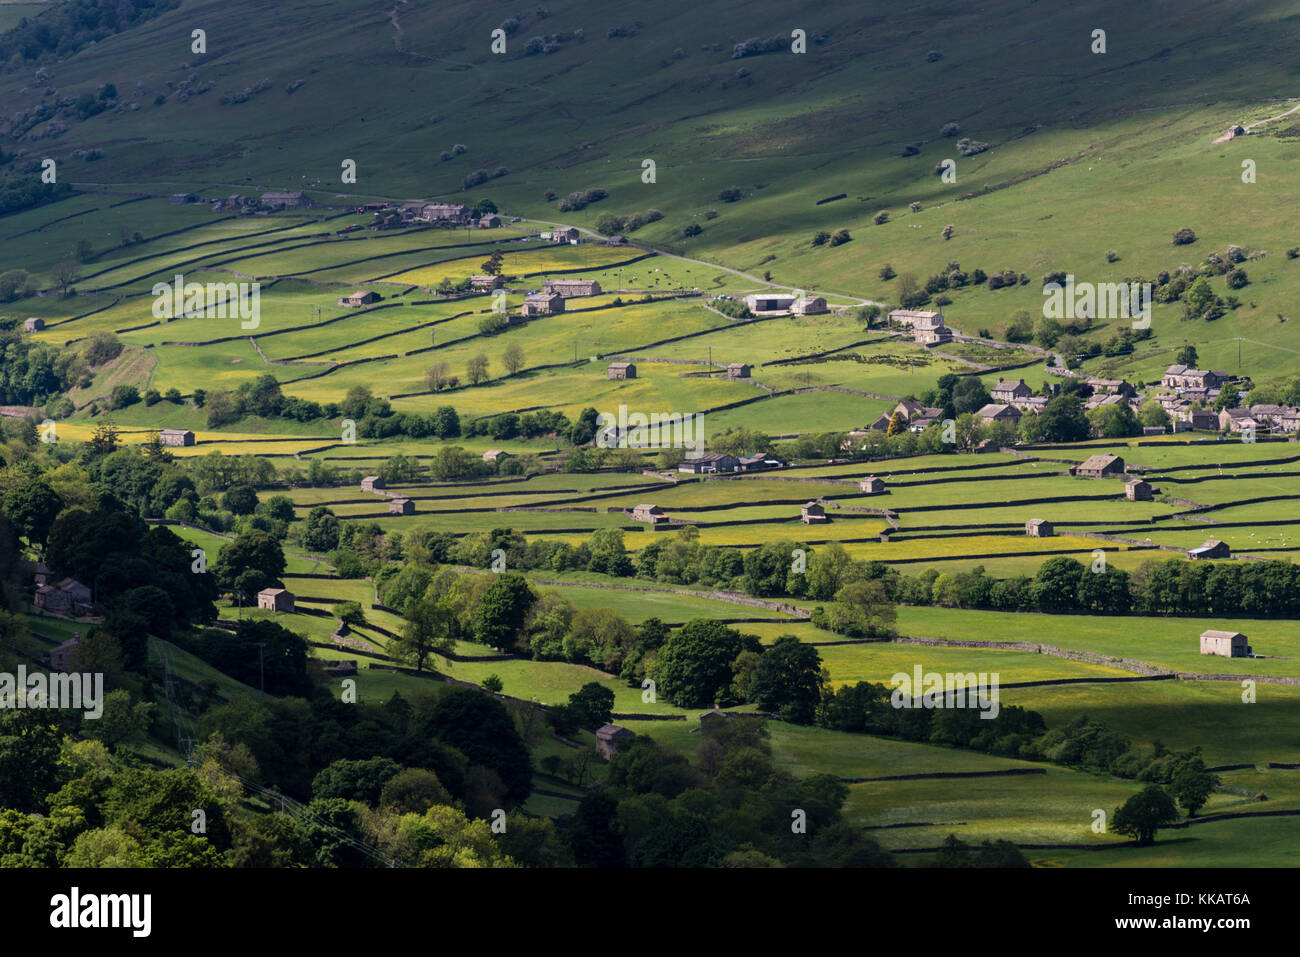 View of stone barns and traditional meadows, Gunnerside, Swaledale, Yorkshire Dales National Park, North Yorkshire, England, United Kingdom, Europe Stock Photo